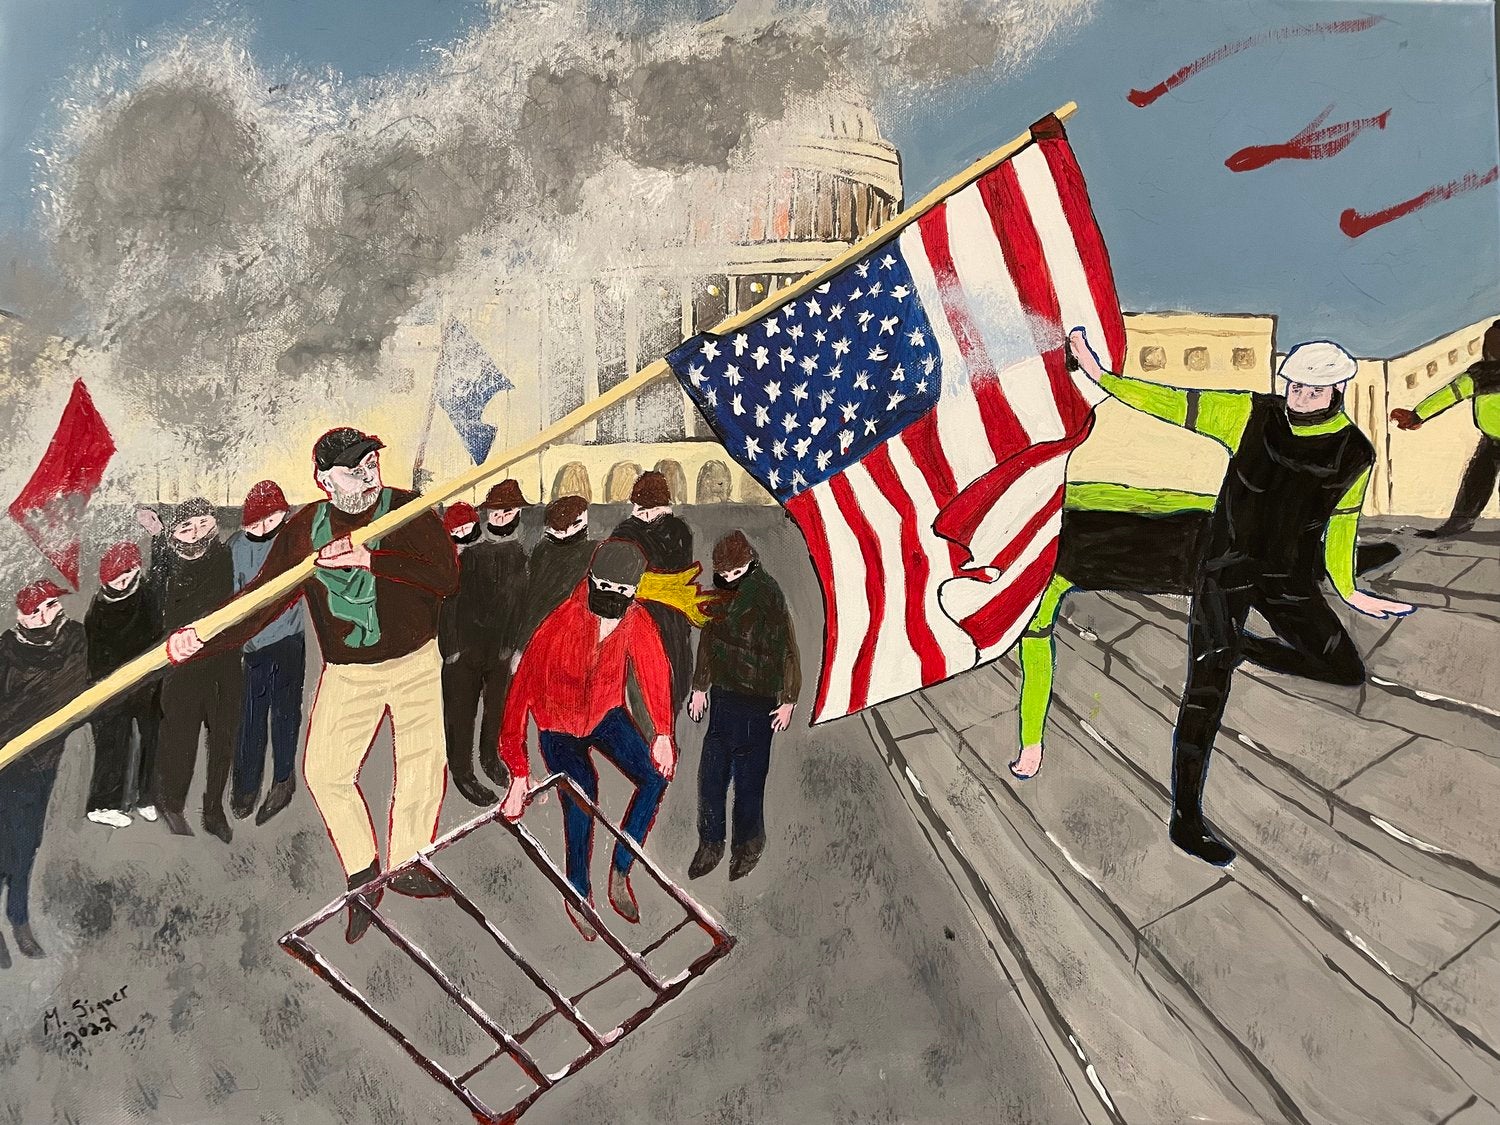 Michael Signer painting of upside down flag at US Capitol with ralliers, guards/police, and smoke.